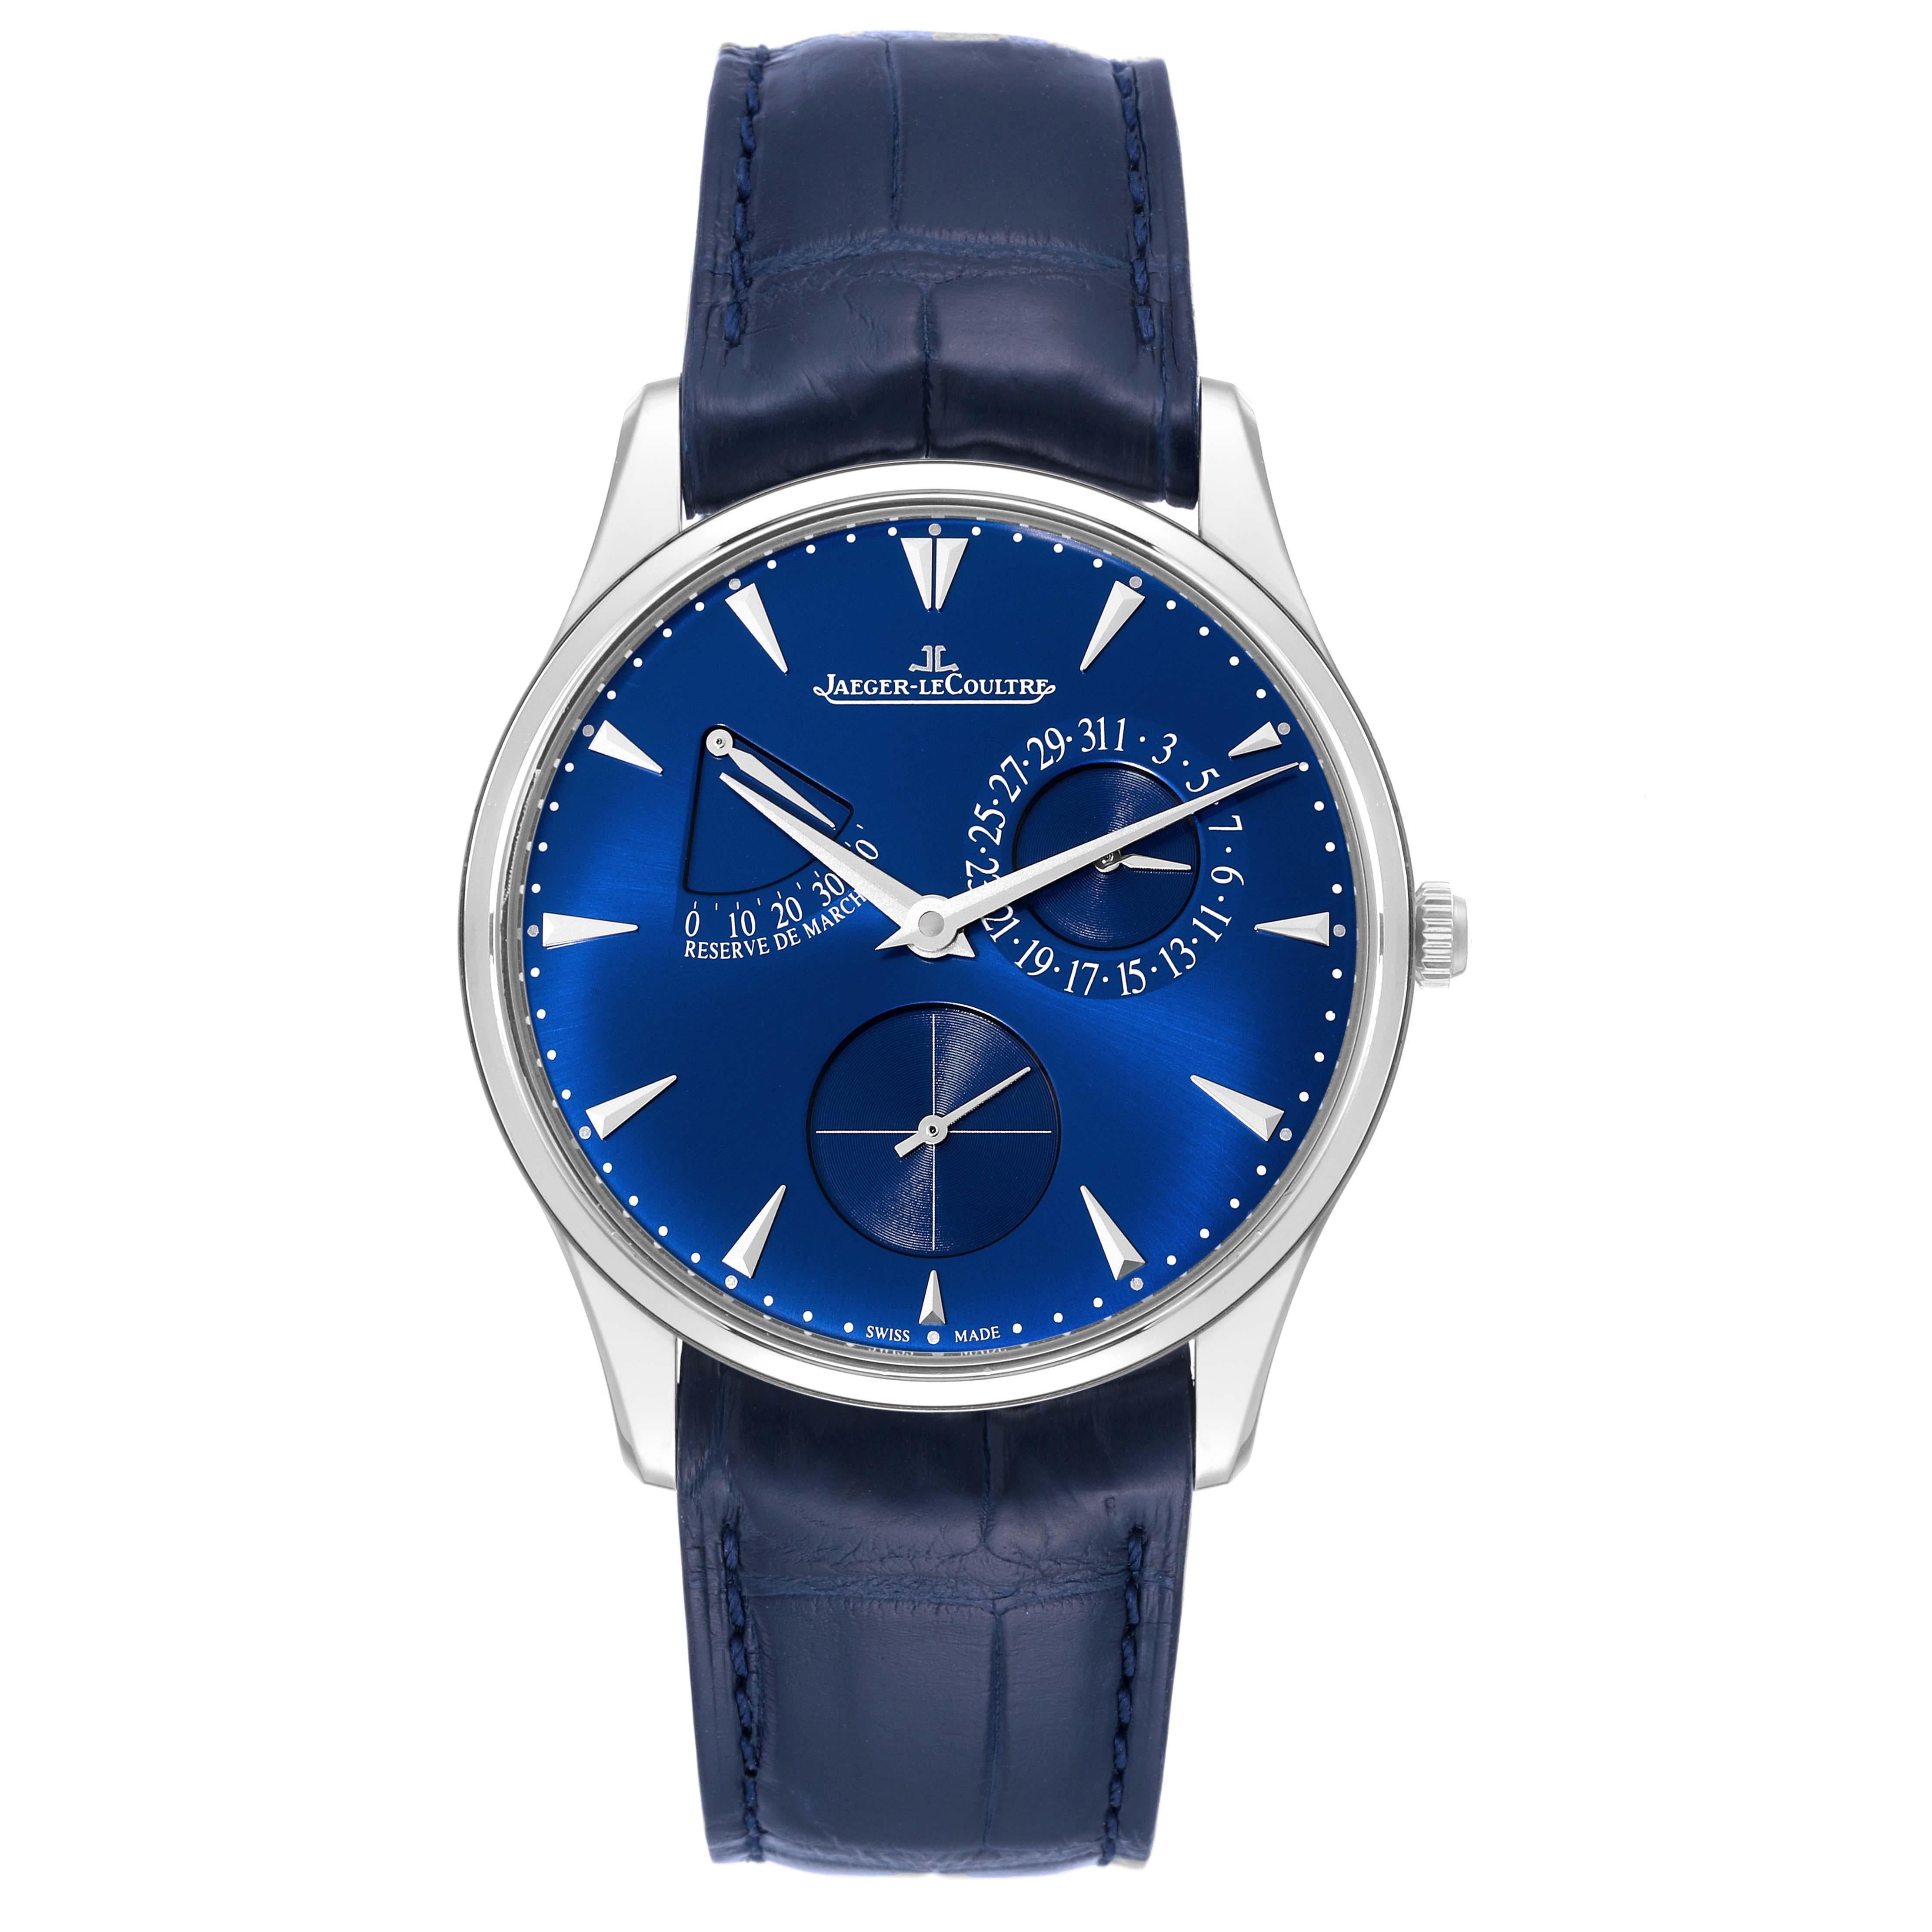 Jaeger Lecoultre Reserve De Marche Steel Mens Watch 176.8.38.S Q1378480 Papers. Self-winding automatic movement. Stainless steel two-body case 37.0 mm in diameter. Case thickness: 10 mm. Concave and curved lugs. Stainless steel inclined bezel.